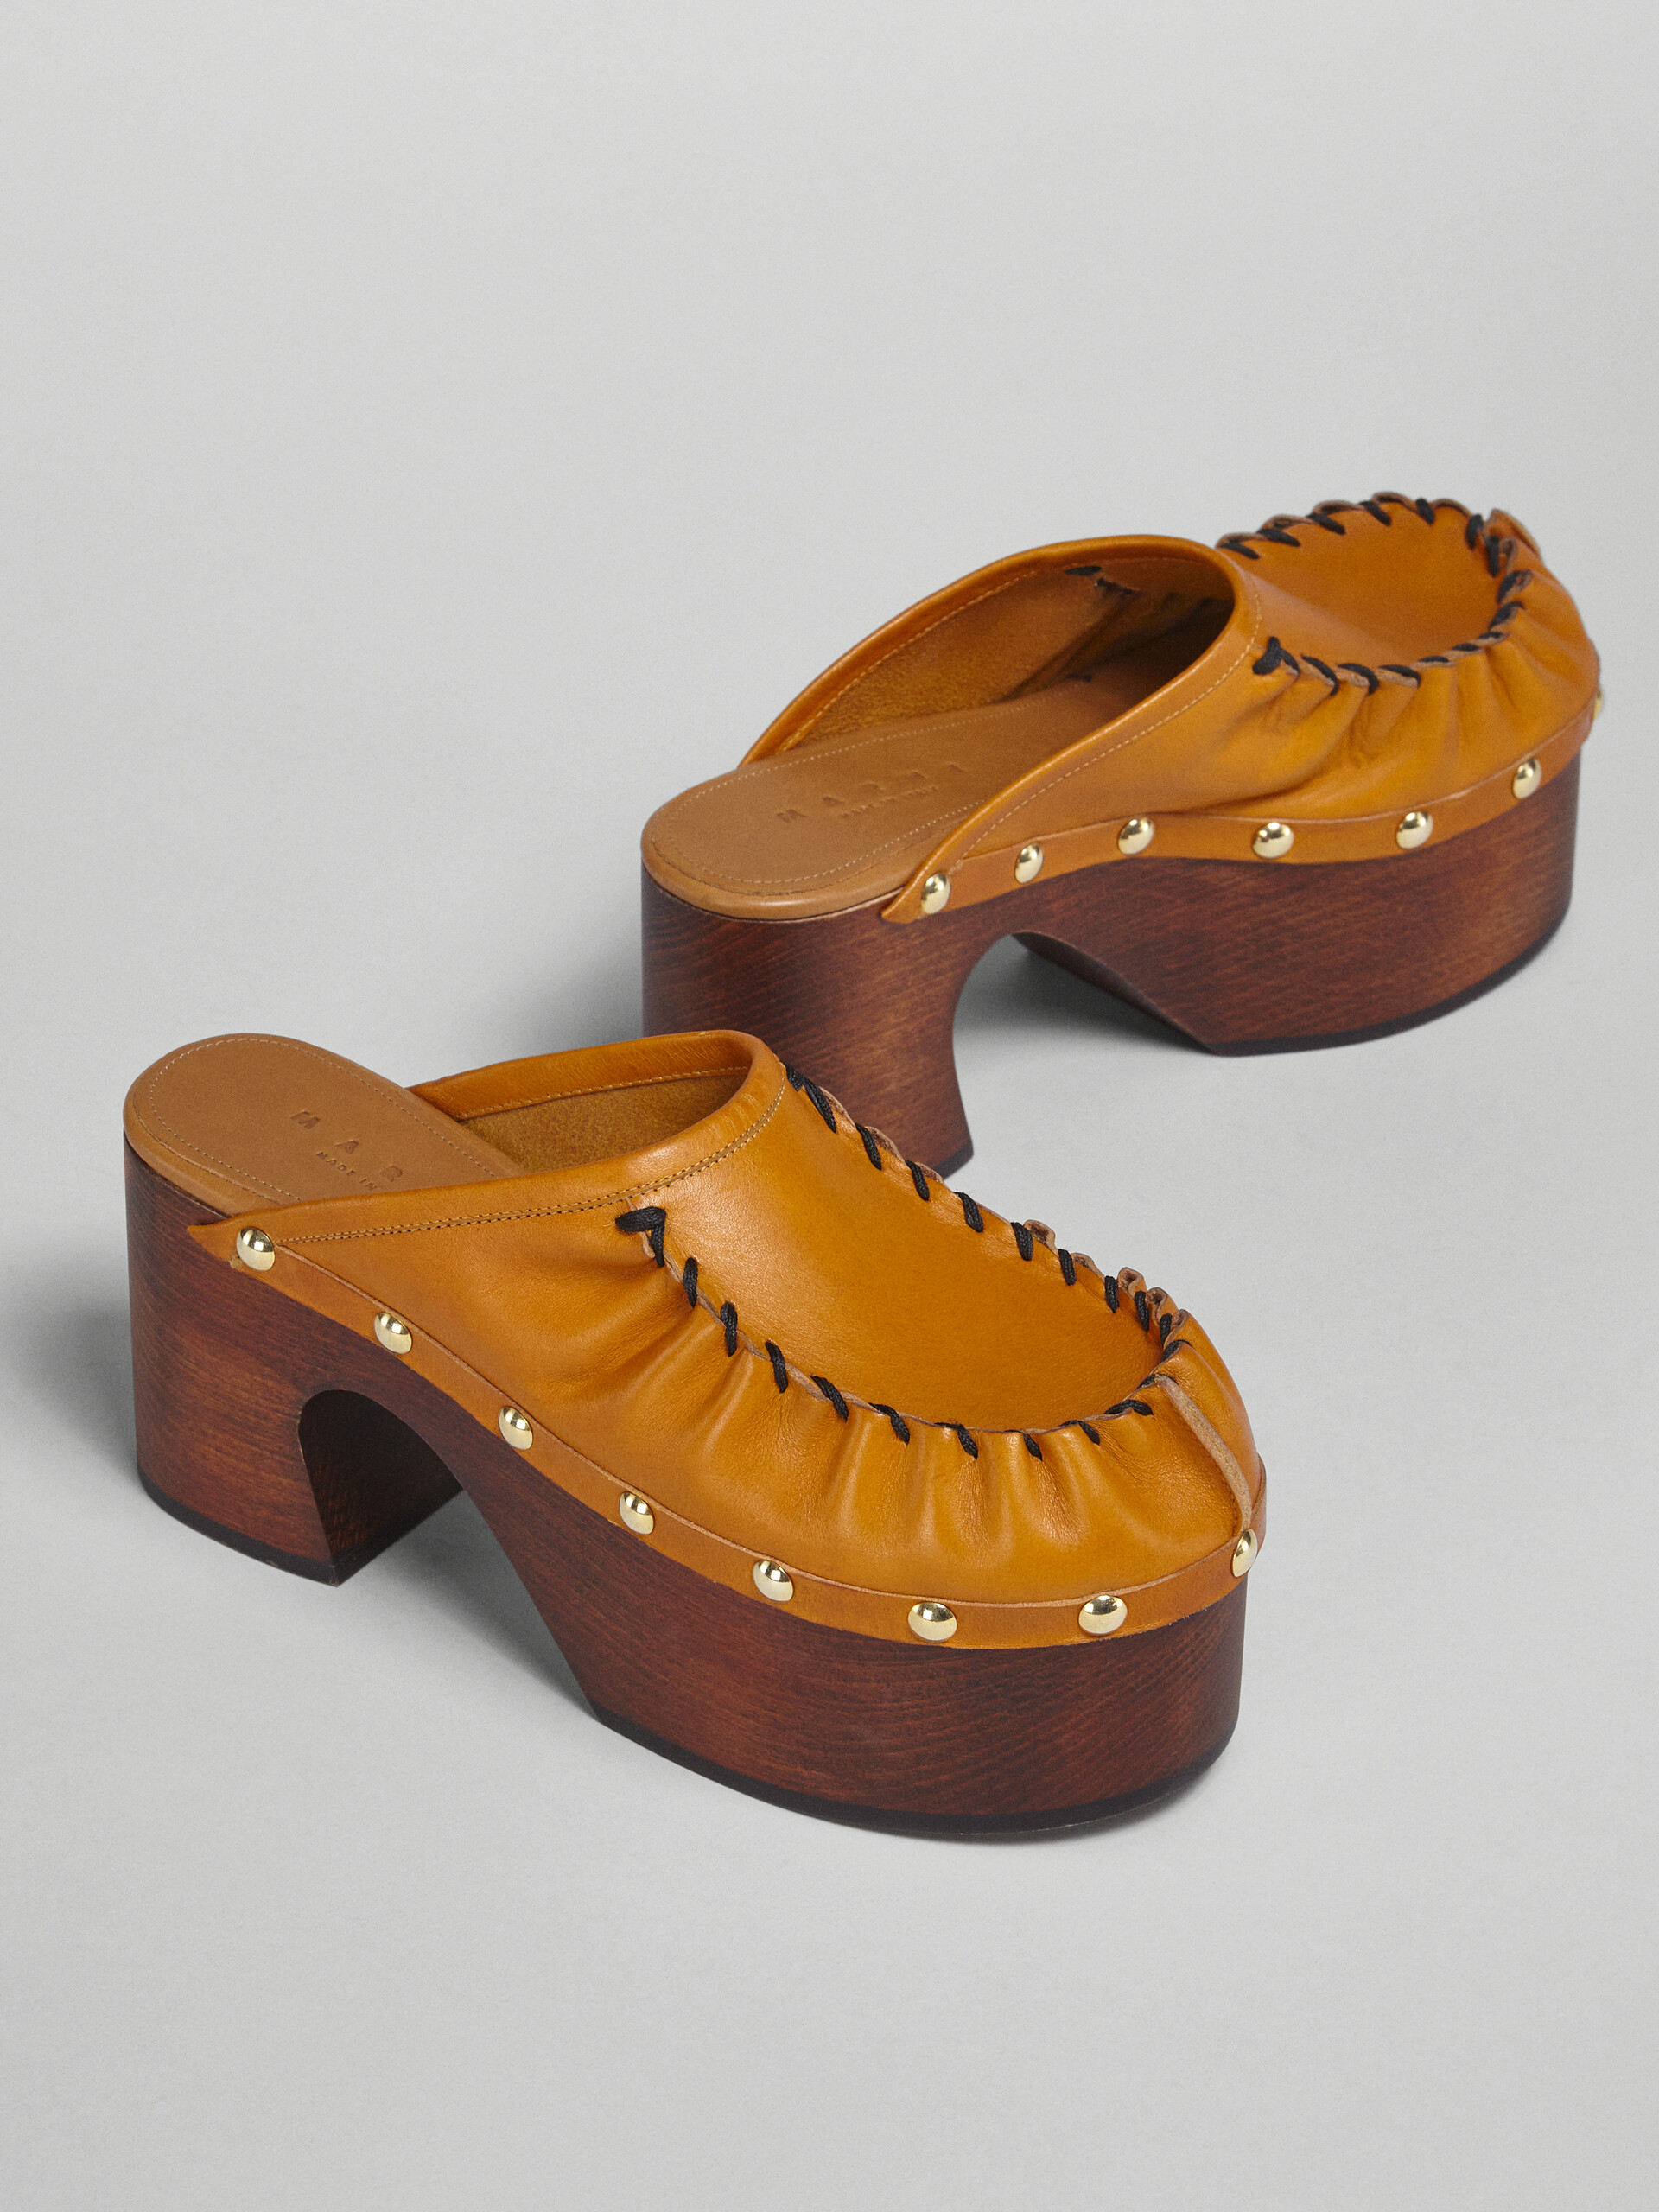 Vegetable-tanned leather sabot - Clogs - Image 5